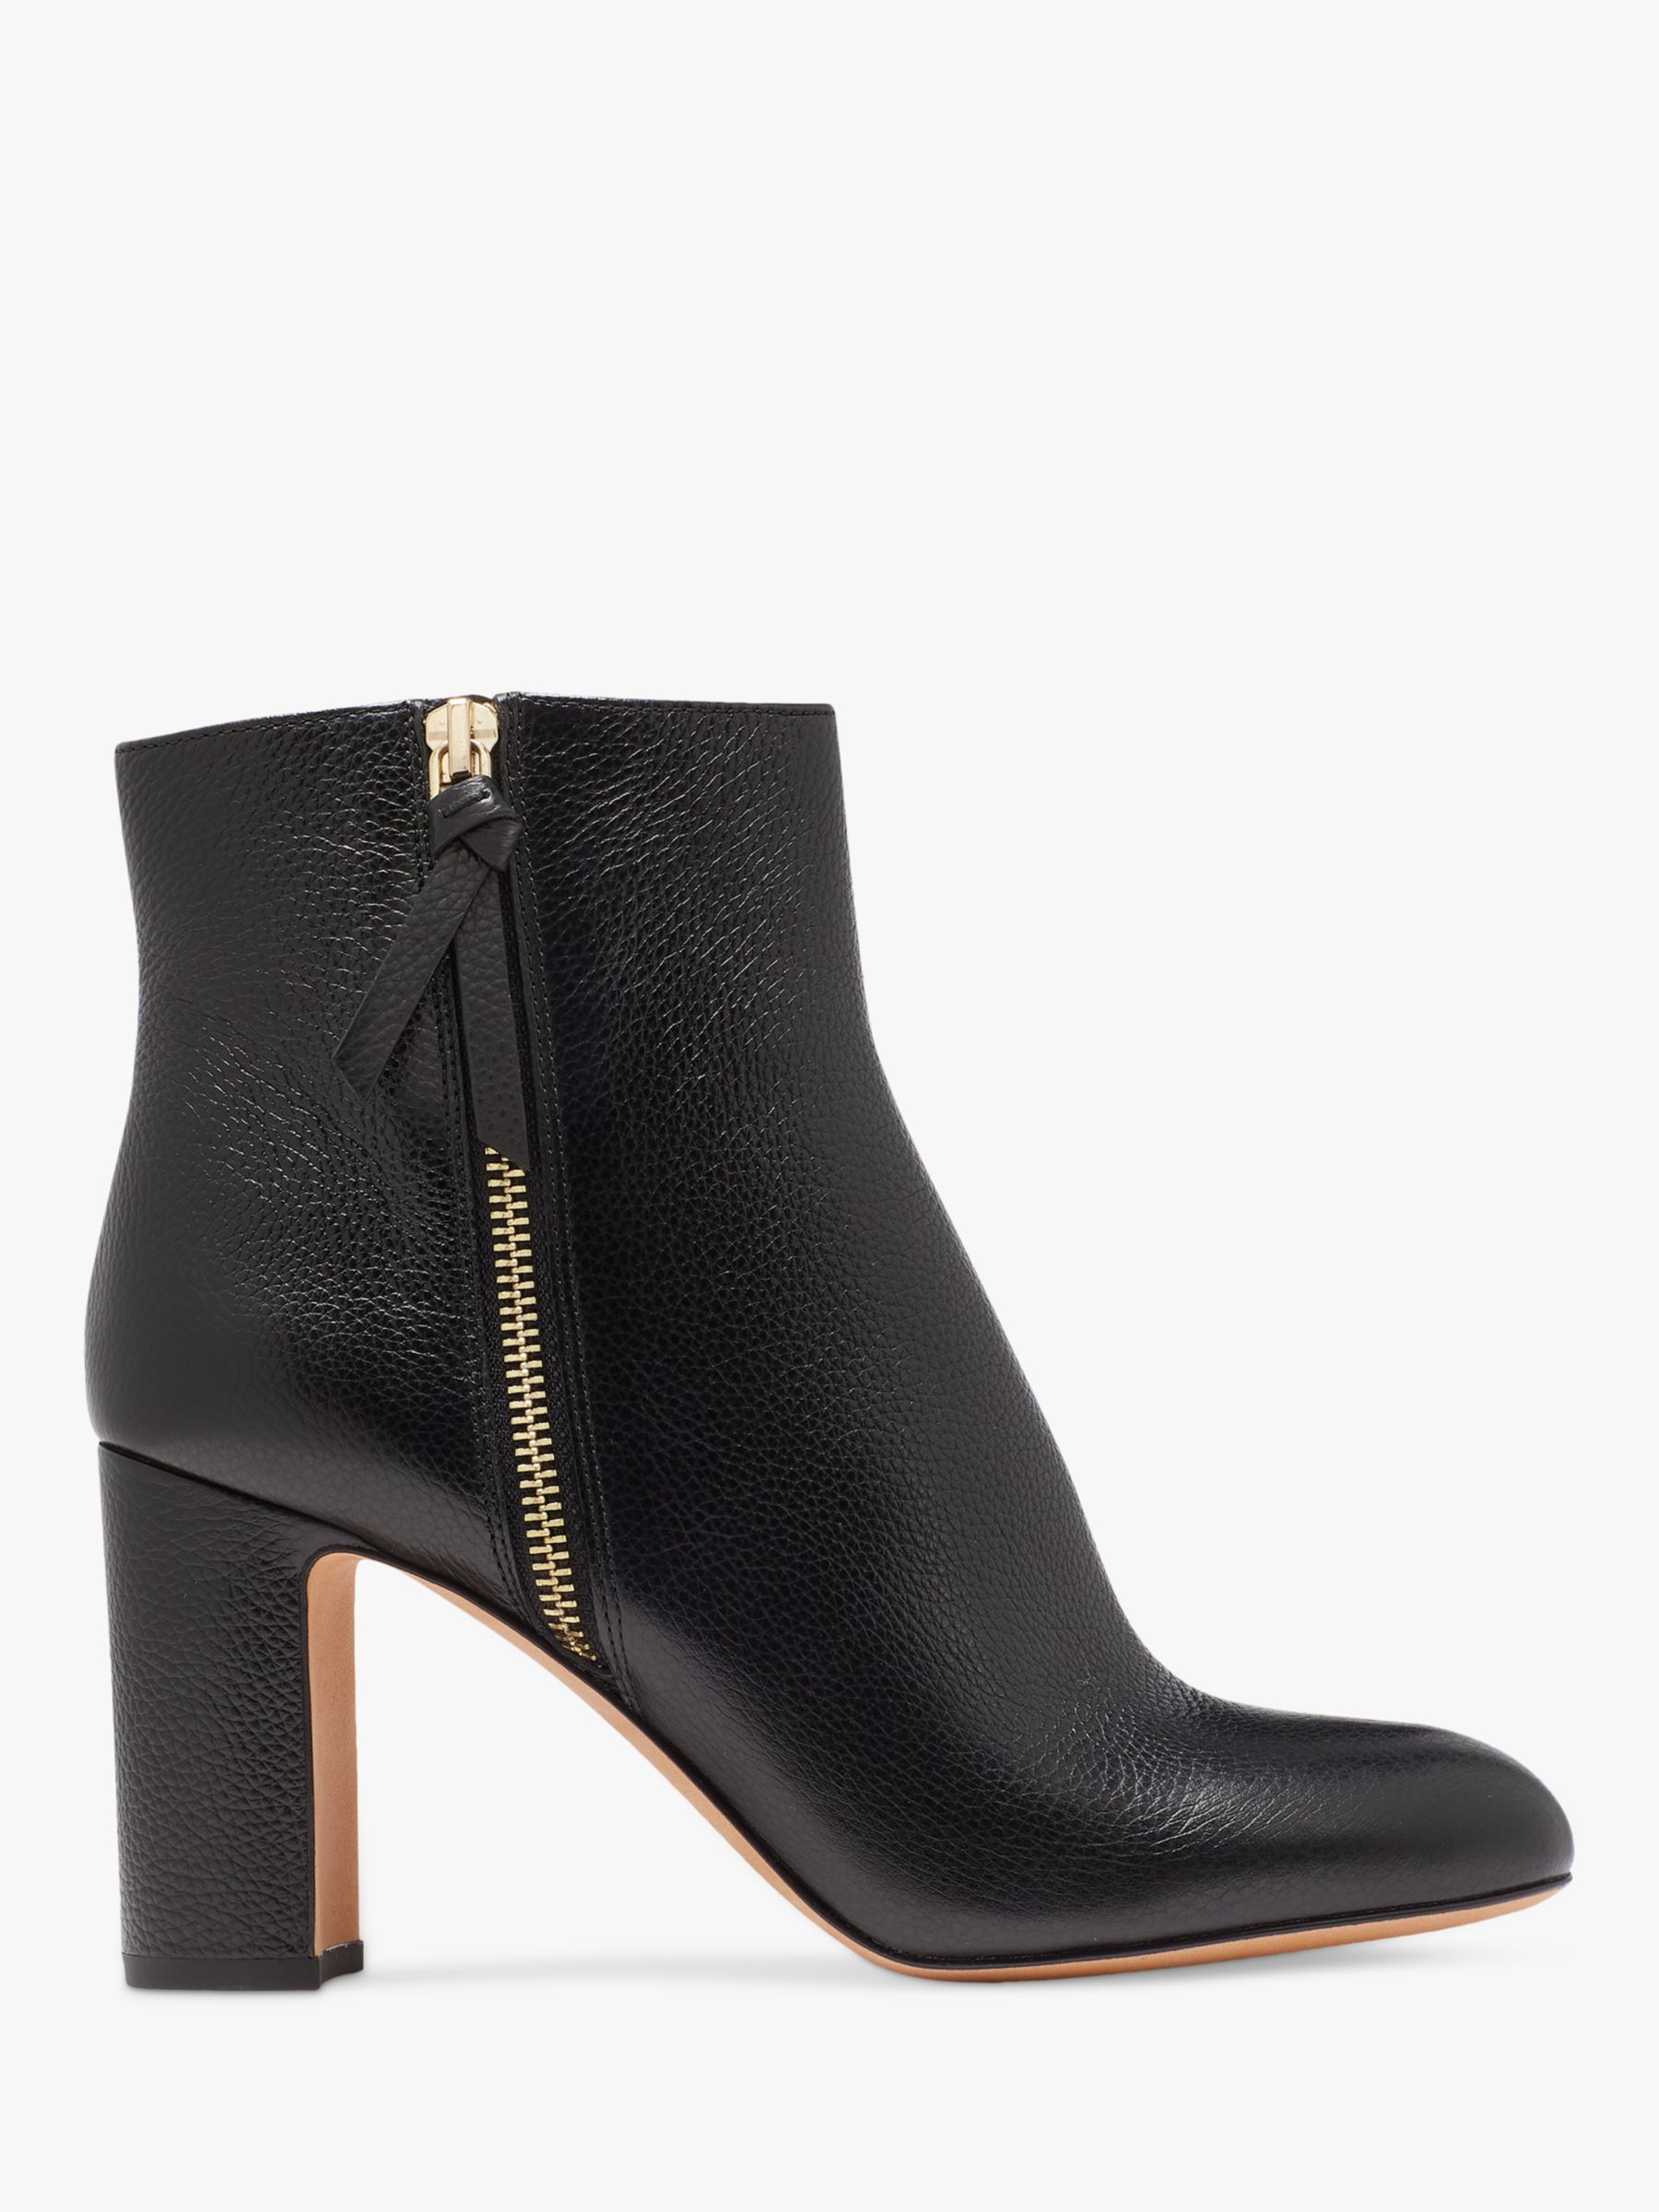 kate spade new york Knott Detail Leather Ankle Boots, Black